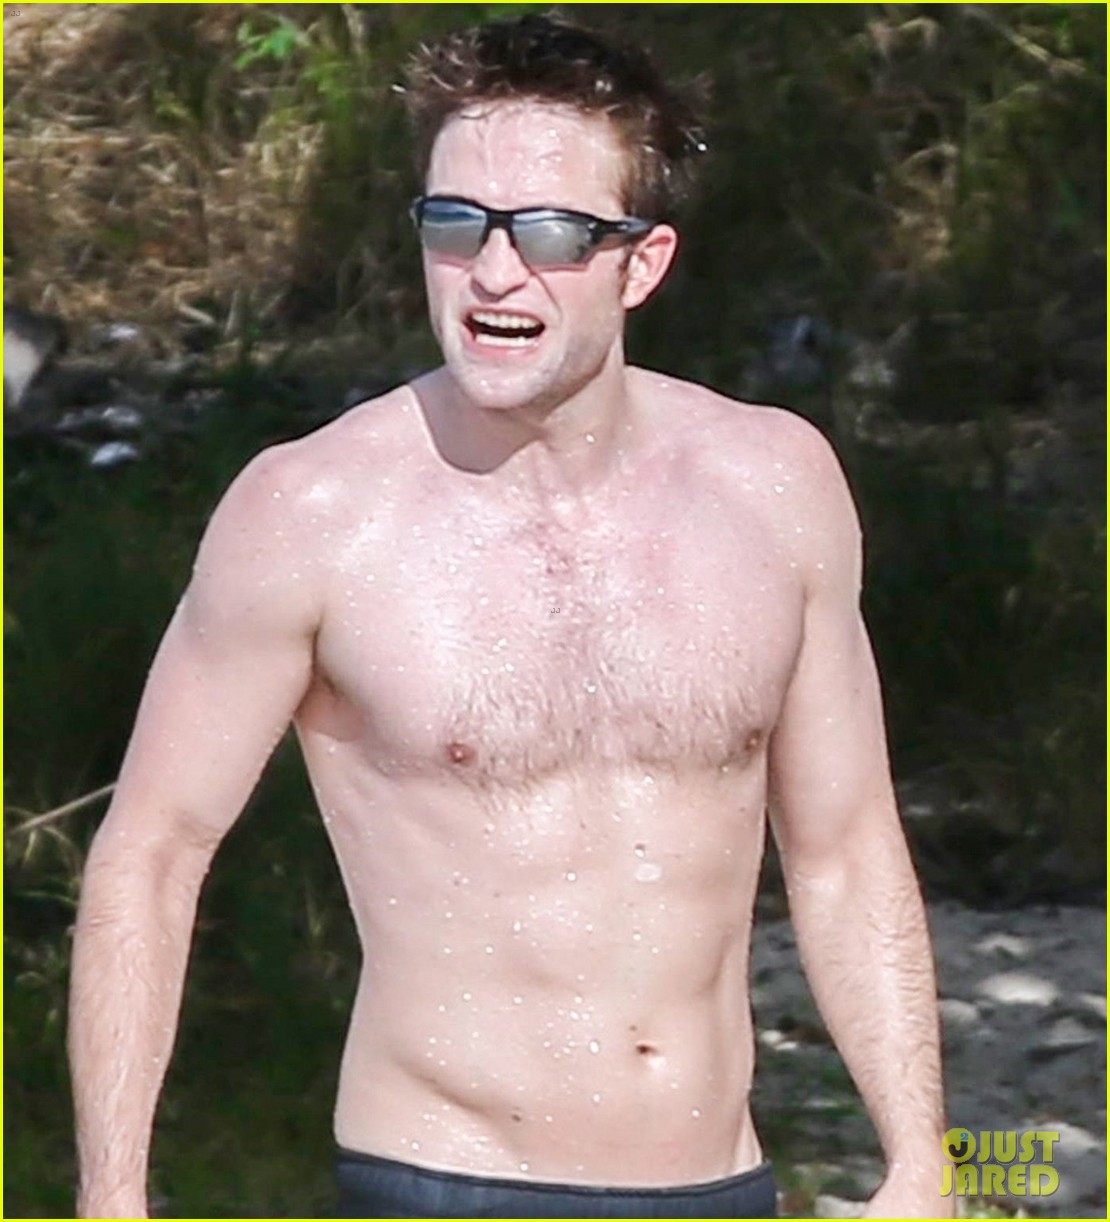 robert pattinson bares ripped body while shirtless in antigua 10